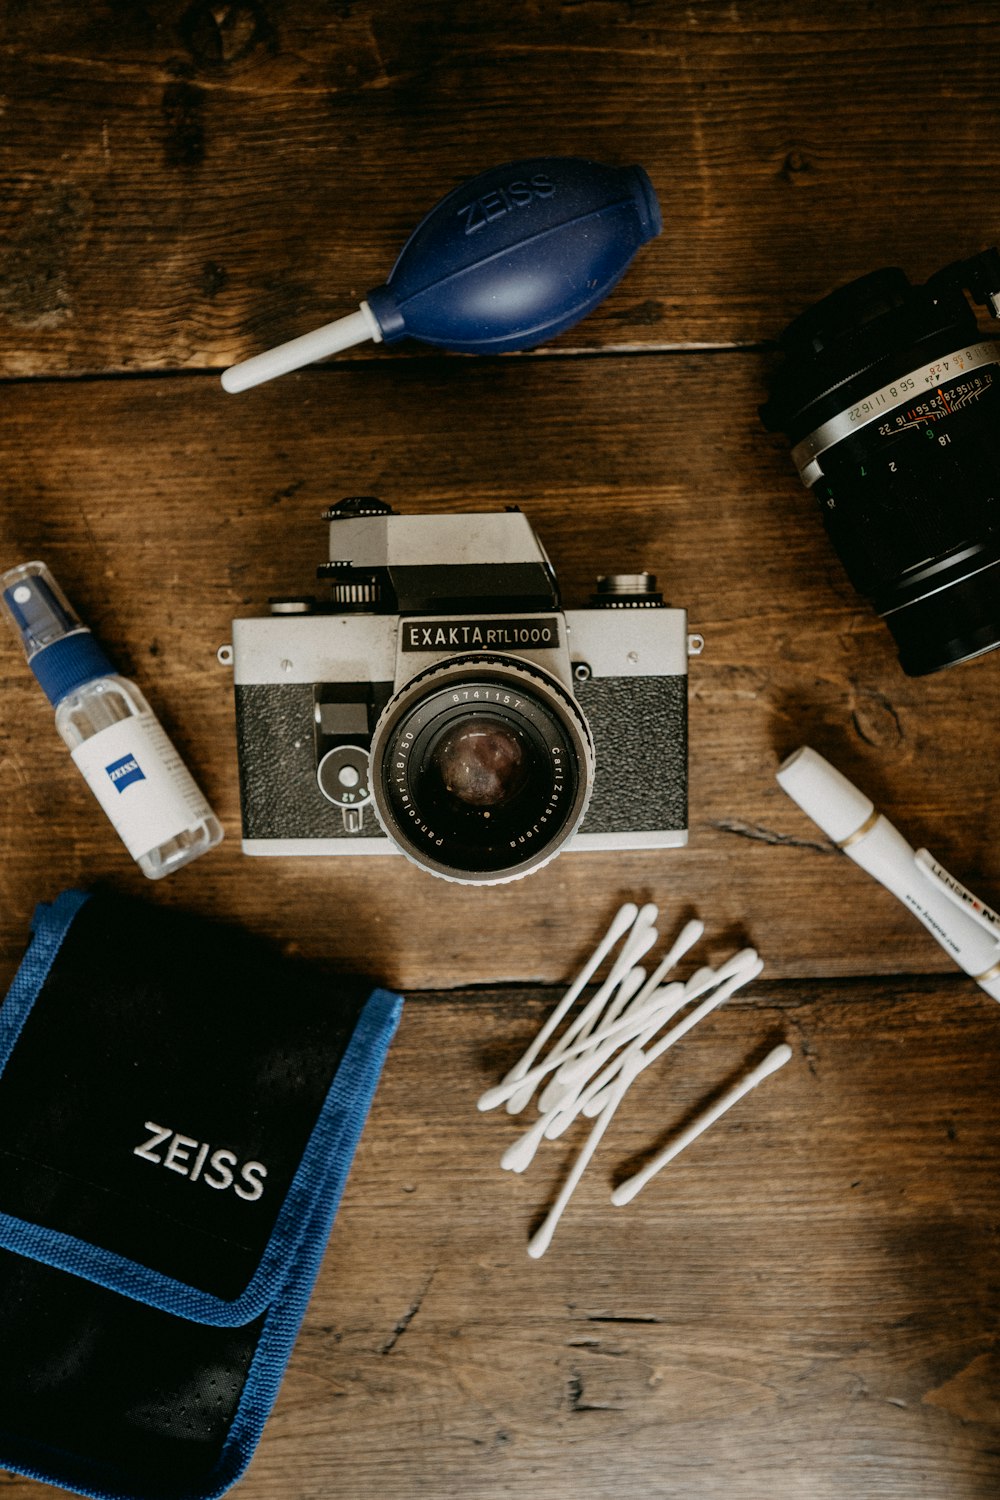 black and silver dslr camera beside white and black disposable lighter